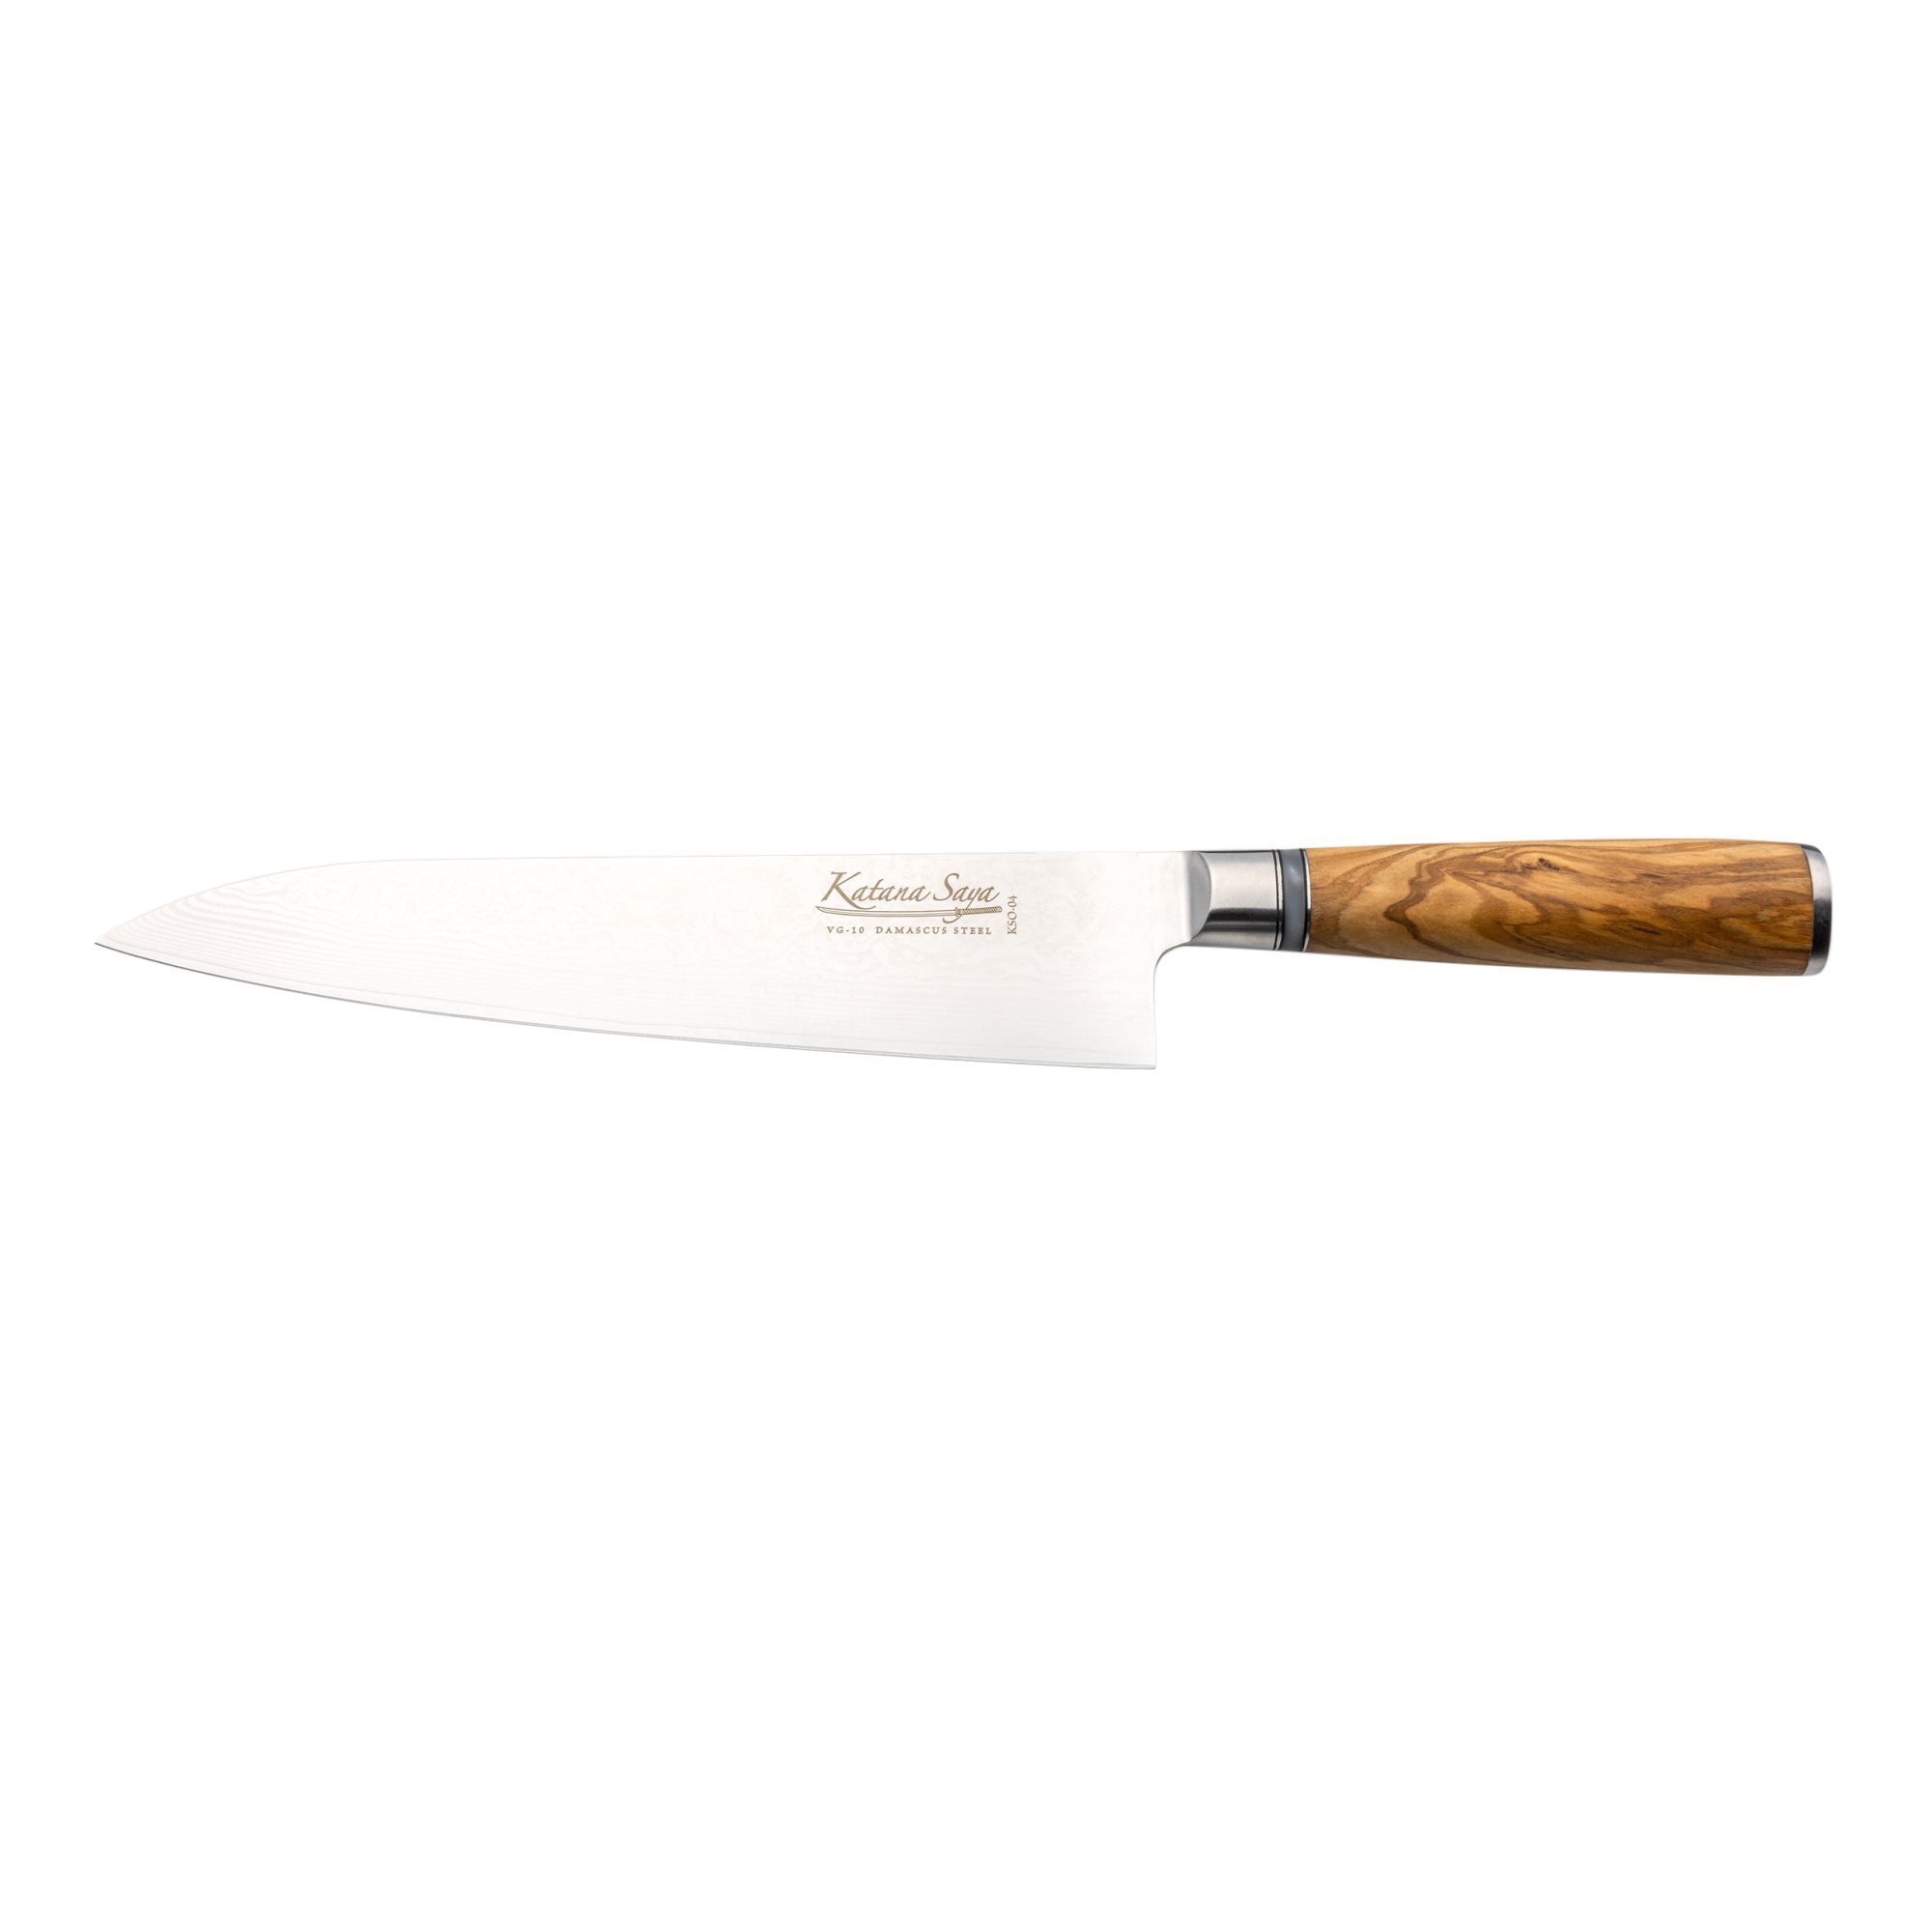 Intuïtie iets Canberra Gyuto mes, staal, 20 cm - Grunwerg | KitchenShop